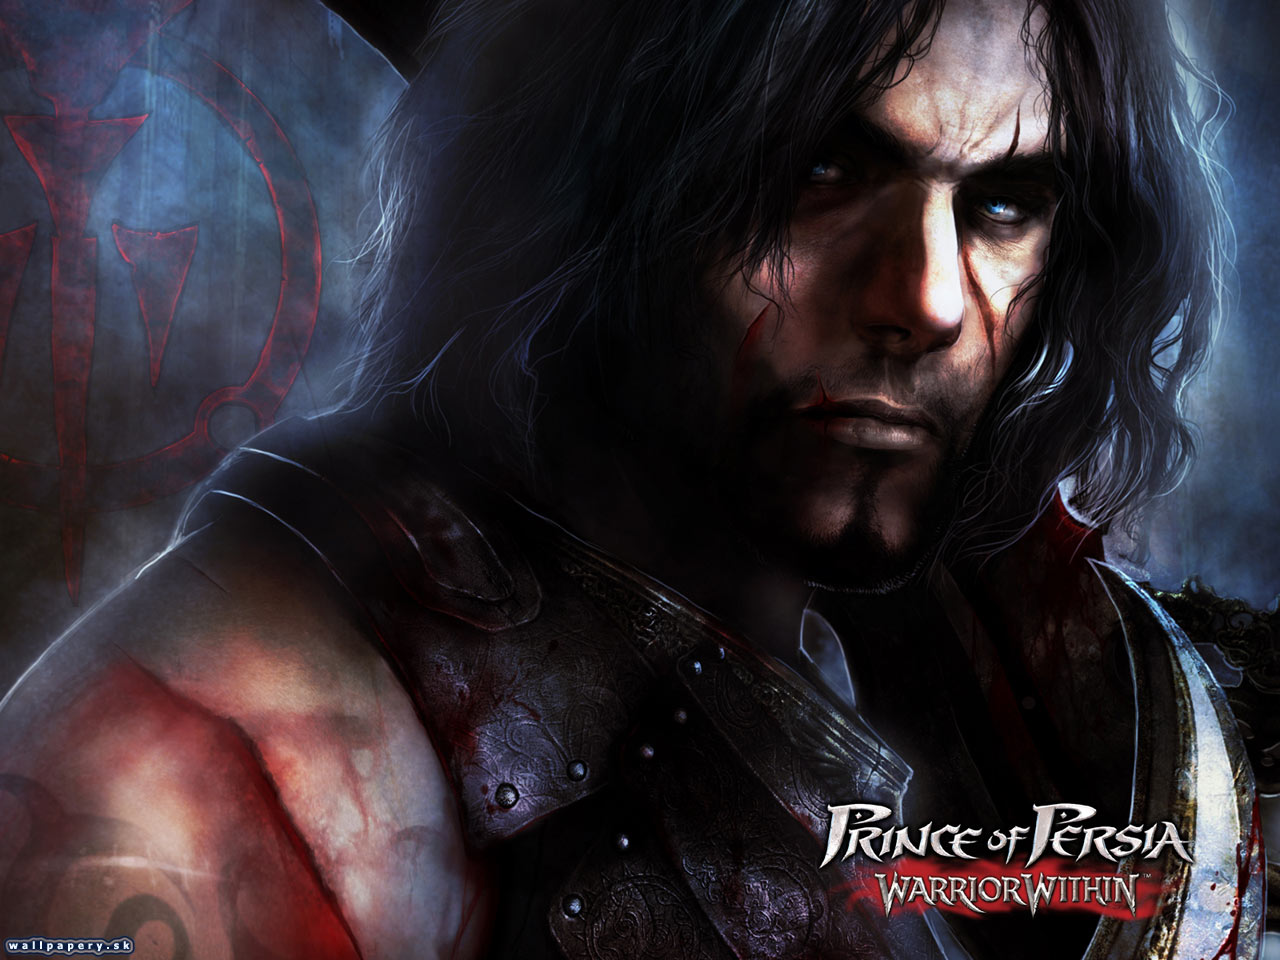 Prince Of Persia Warrior Within Wallpaper Abcgames Cz